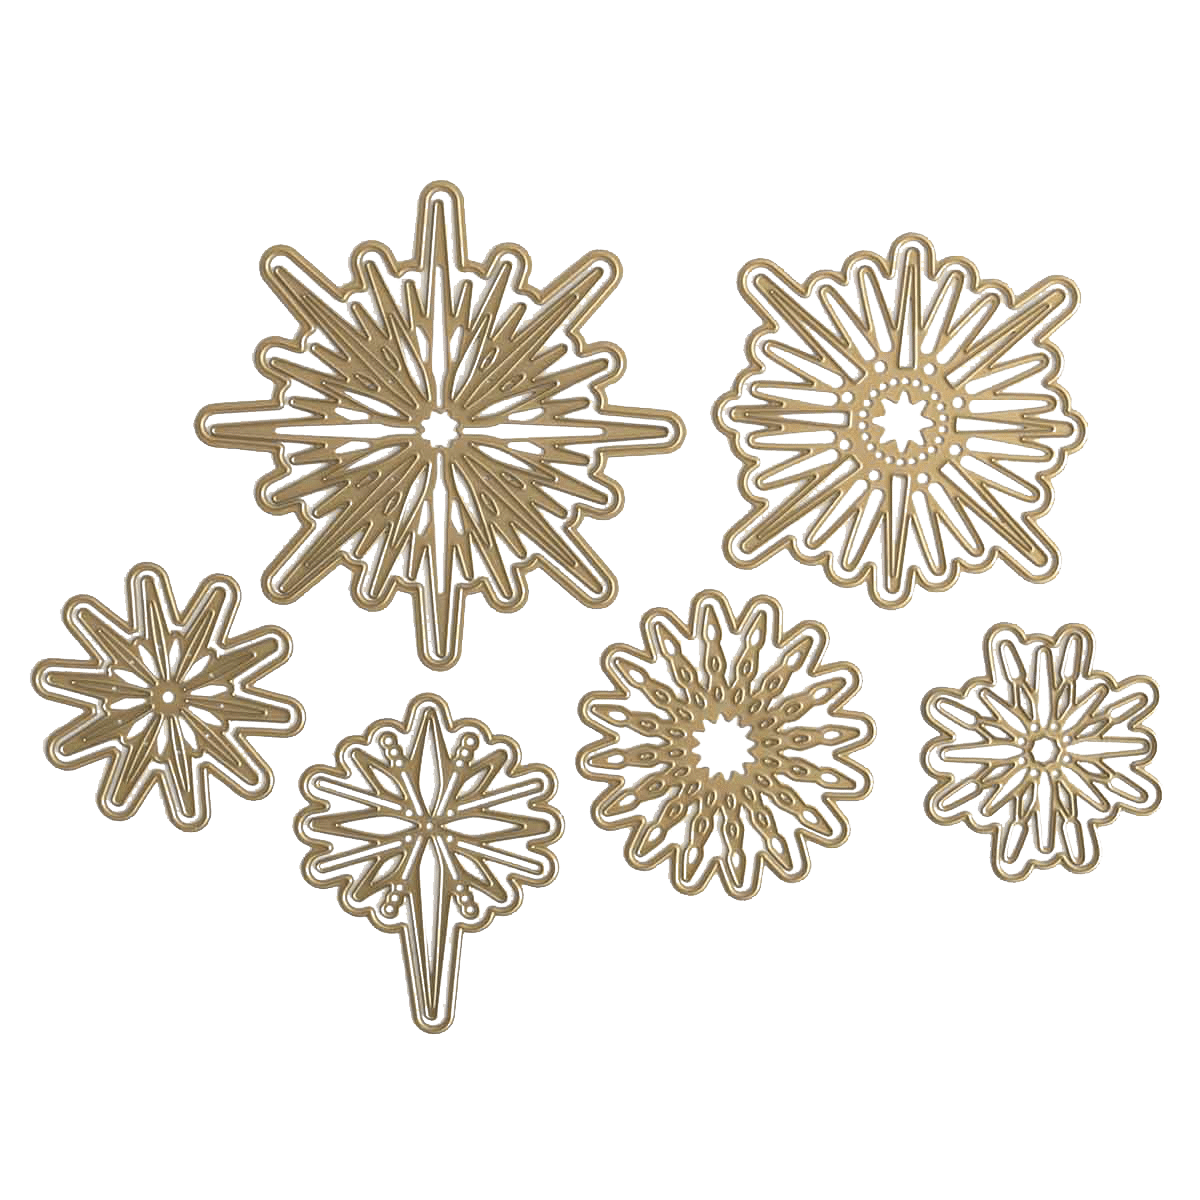 a set of four gold snowflakes on a green background.